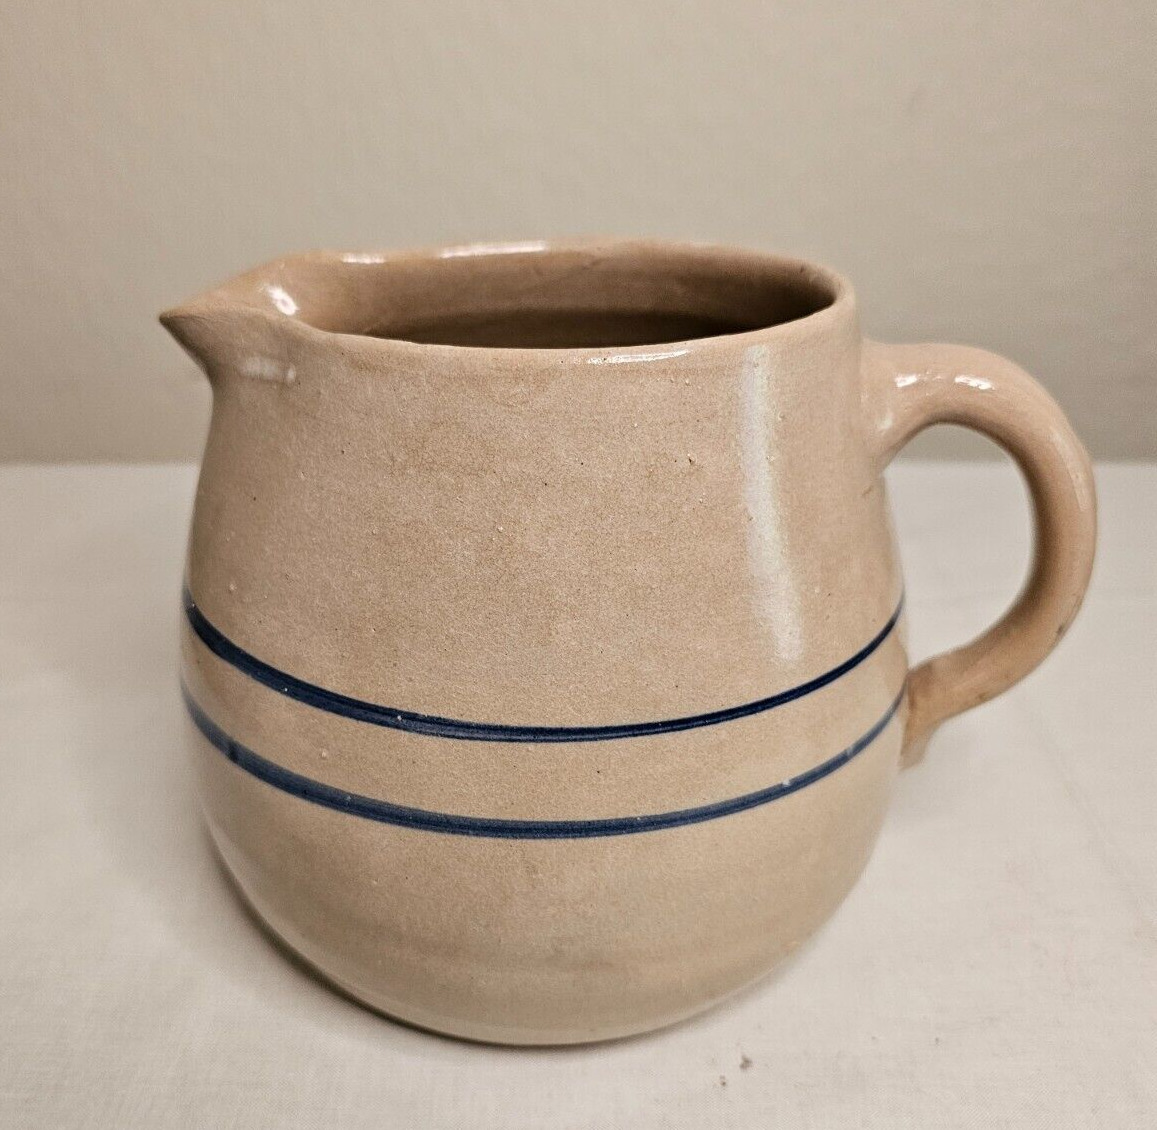 Antique Vtg Stoneware Crock Small 6” Tall Pitcher W Blue Stripes Chippy Floral